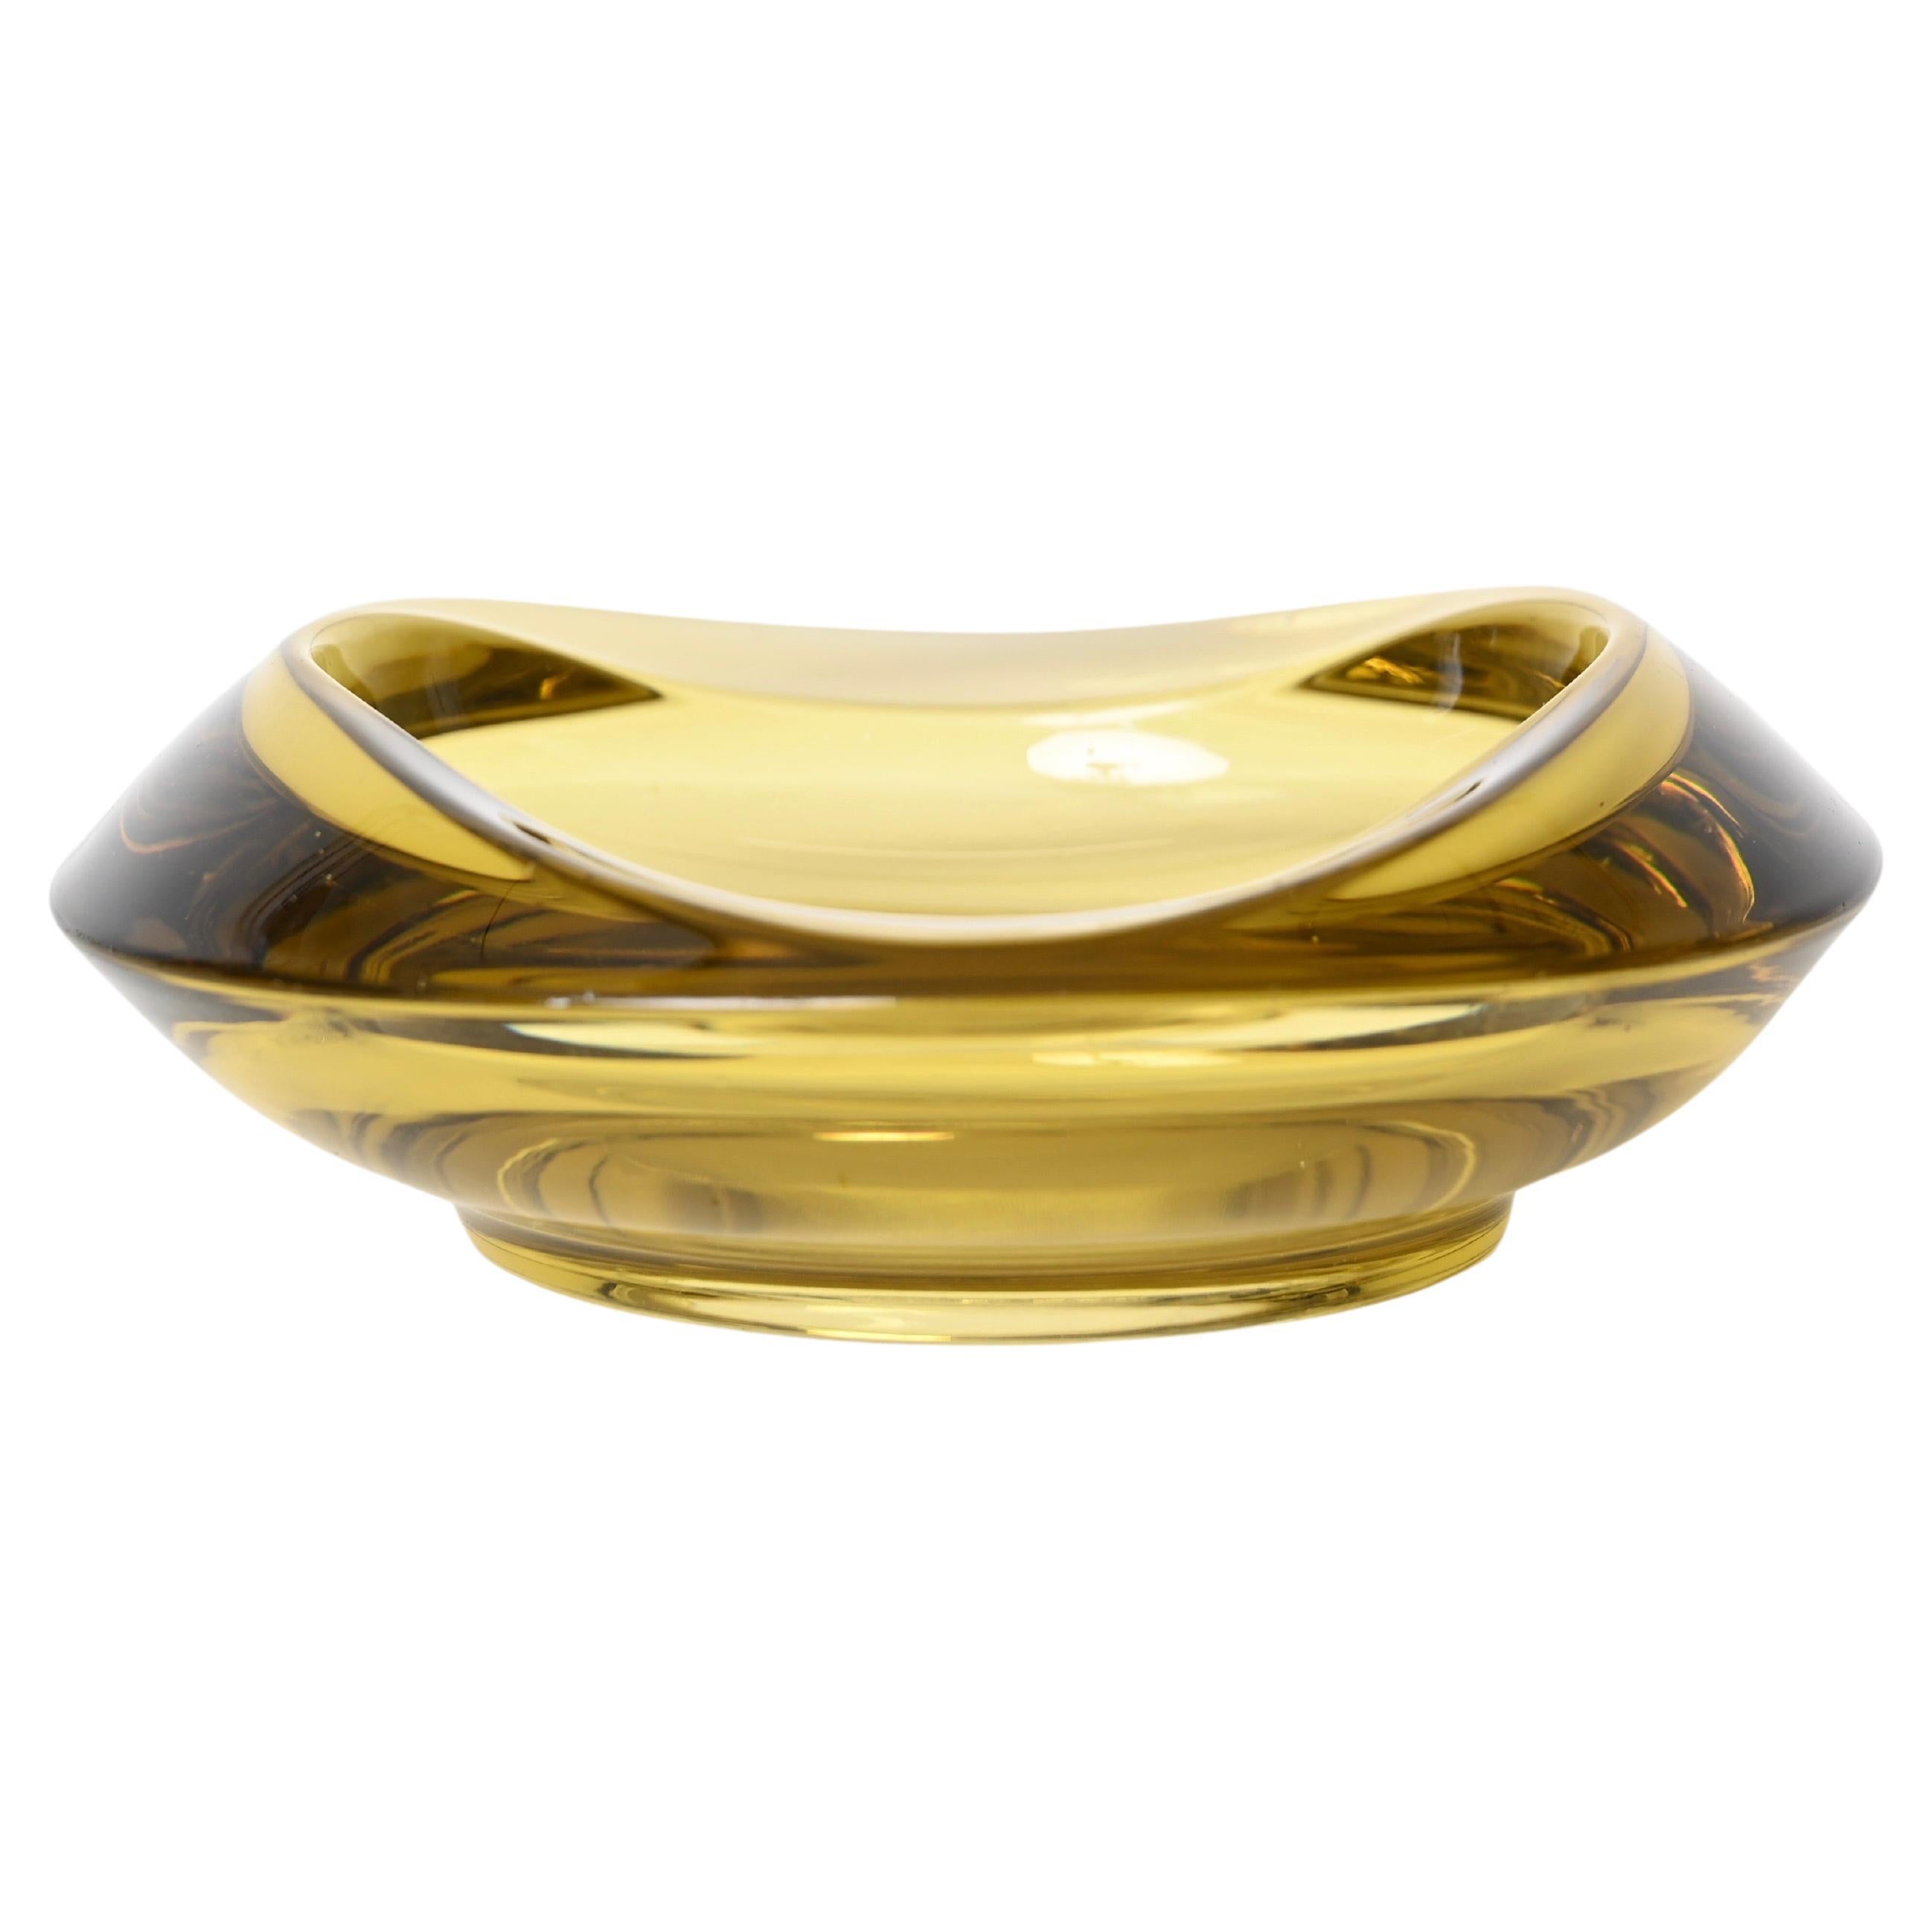 Amber Yellow Murano "Sommerso" Glass Bowl or Ashtray, Italy, Flavio Poli 1960 For Sale